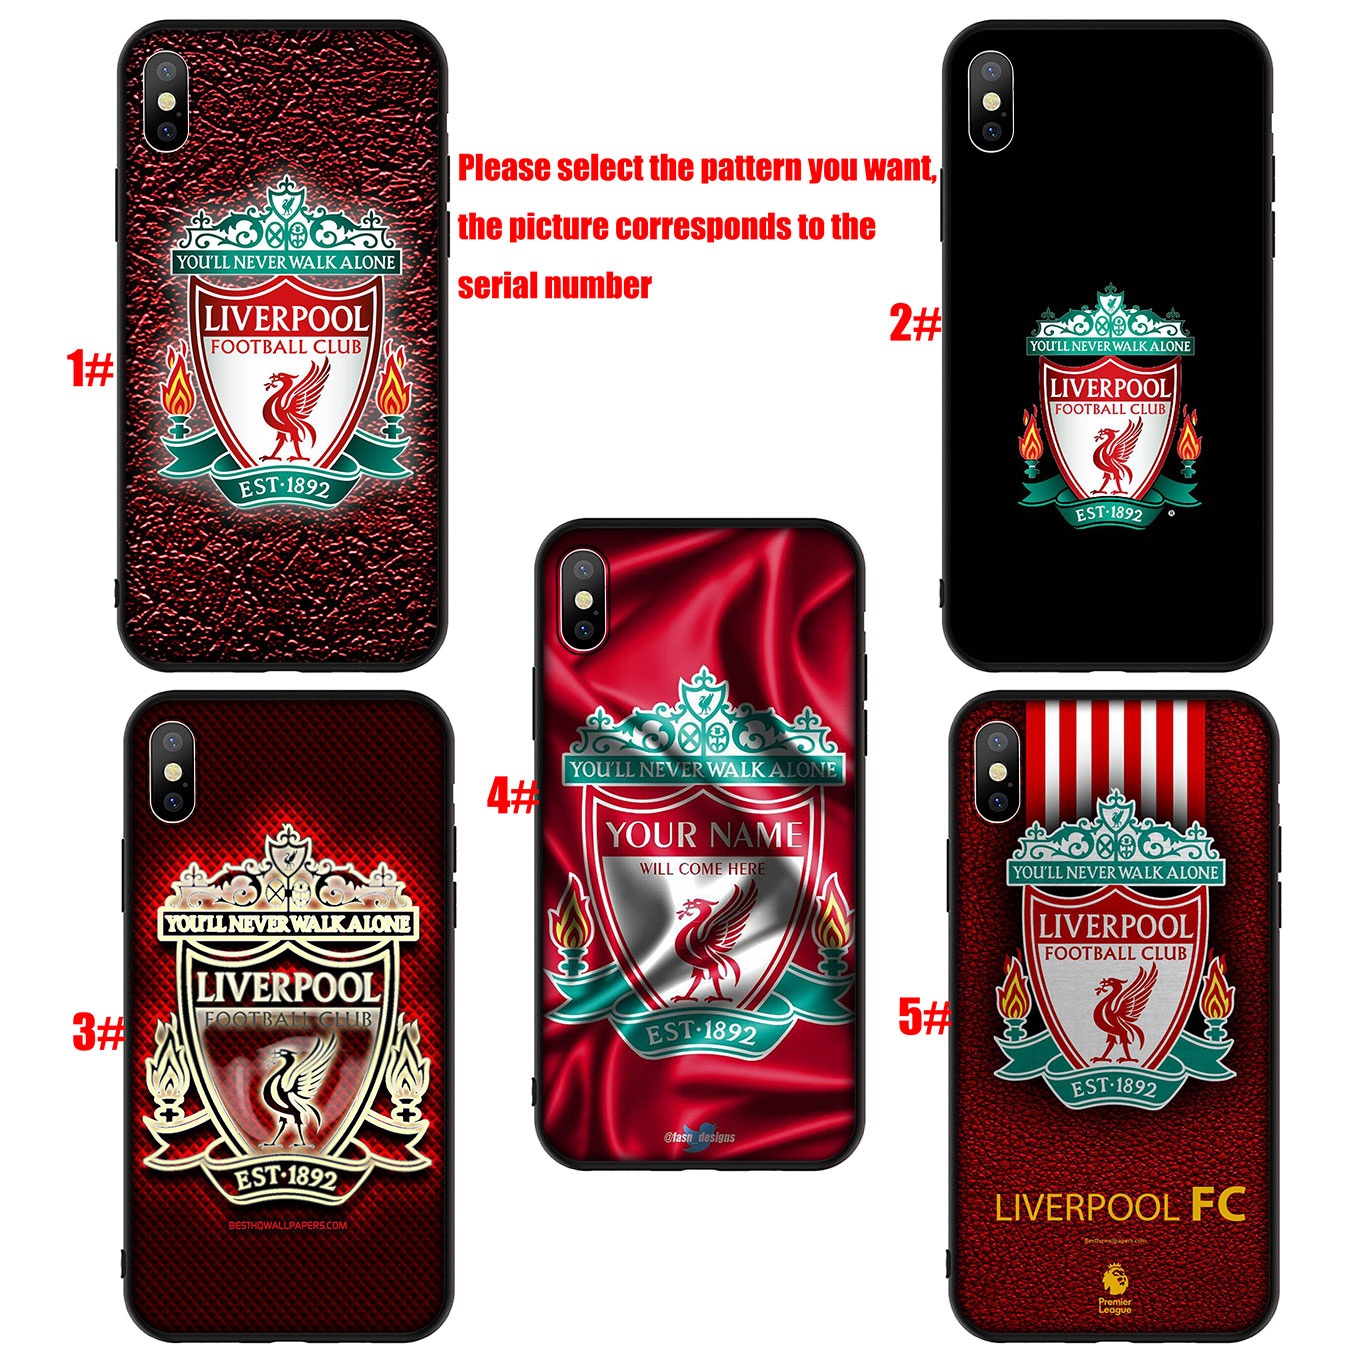 Ốp Điện Thoại Silicon Mềm In Logo Liverpool Cho Samsung Galaxy A11 A31 A10 A20 A30 A50 A10s A20s A30s A50s A71 A51